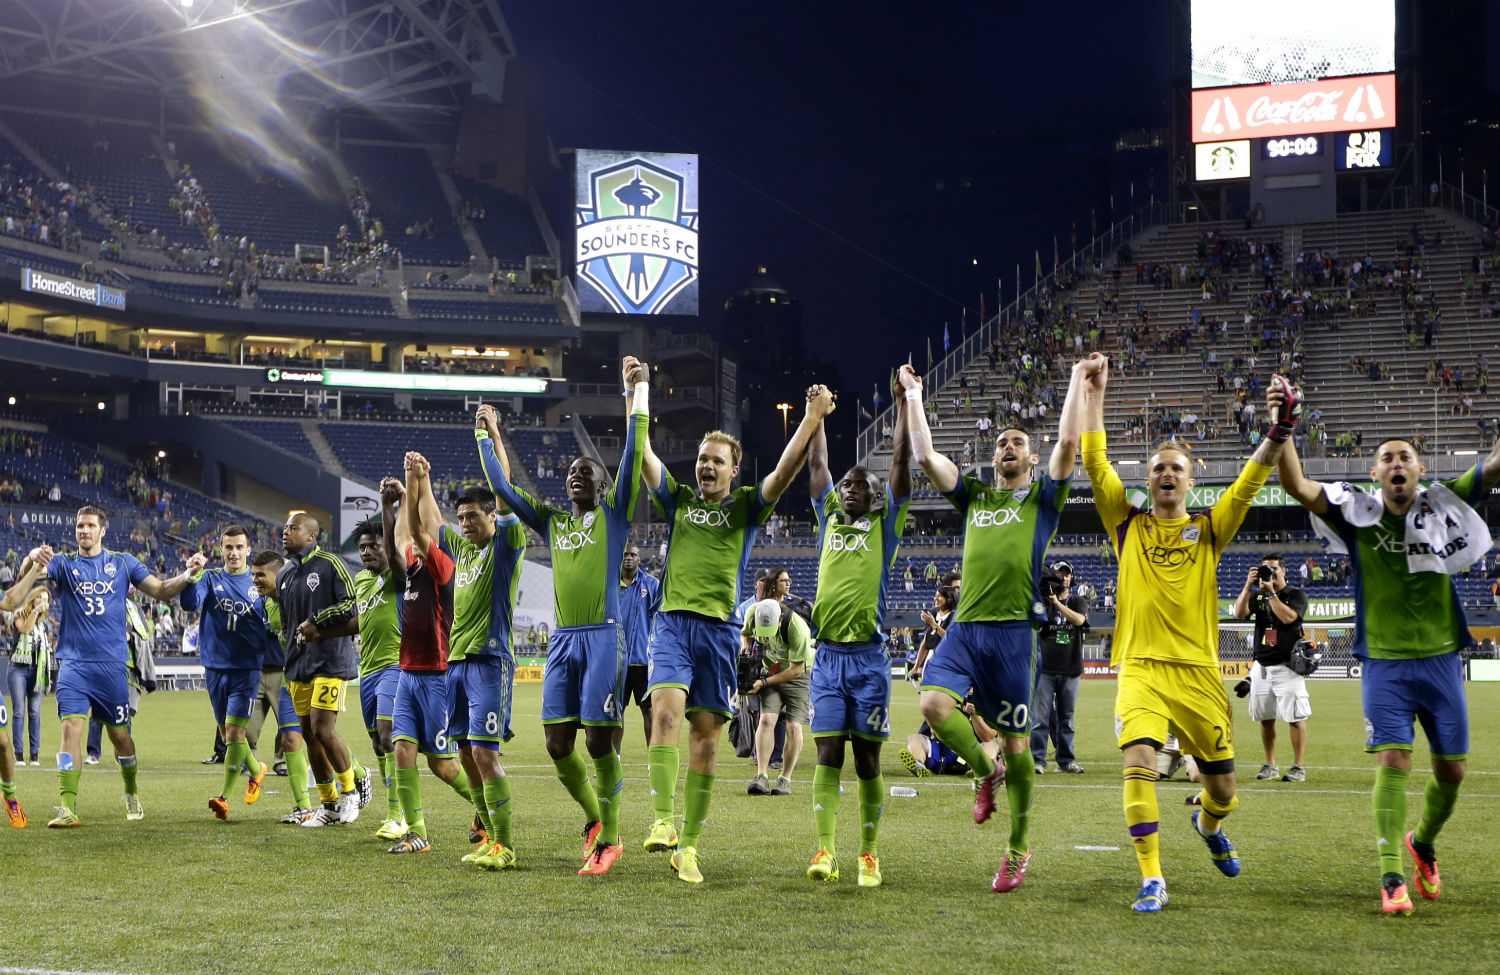 Thanks to Sounders, I See Another World Cup Is Possible